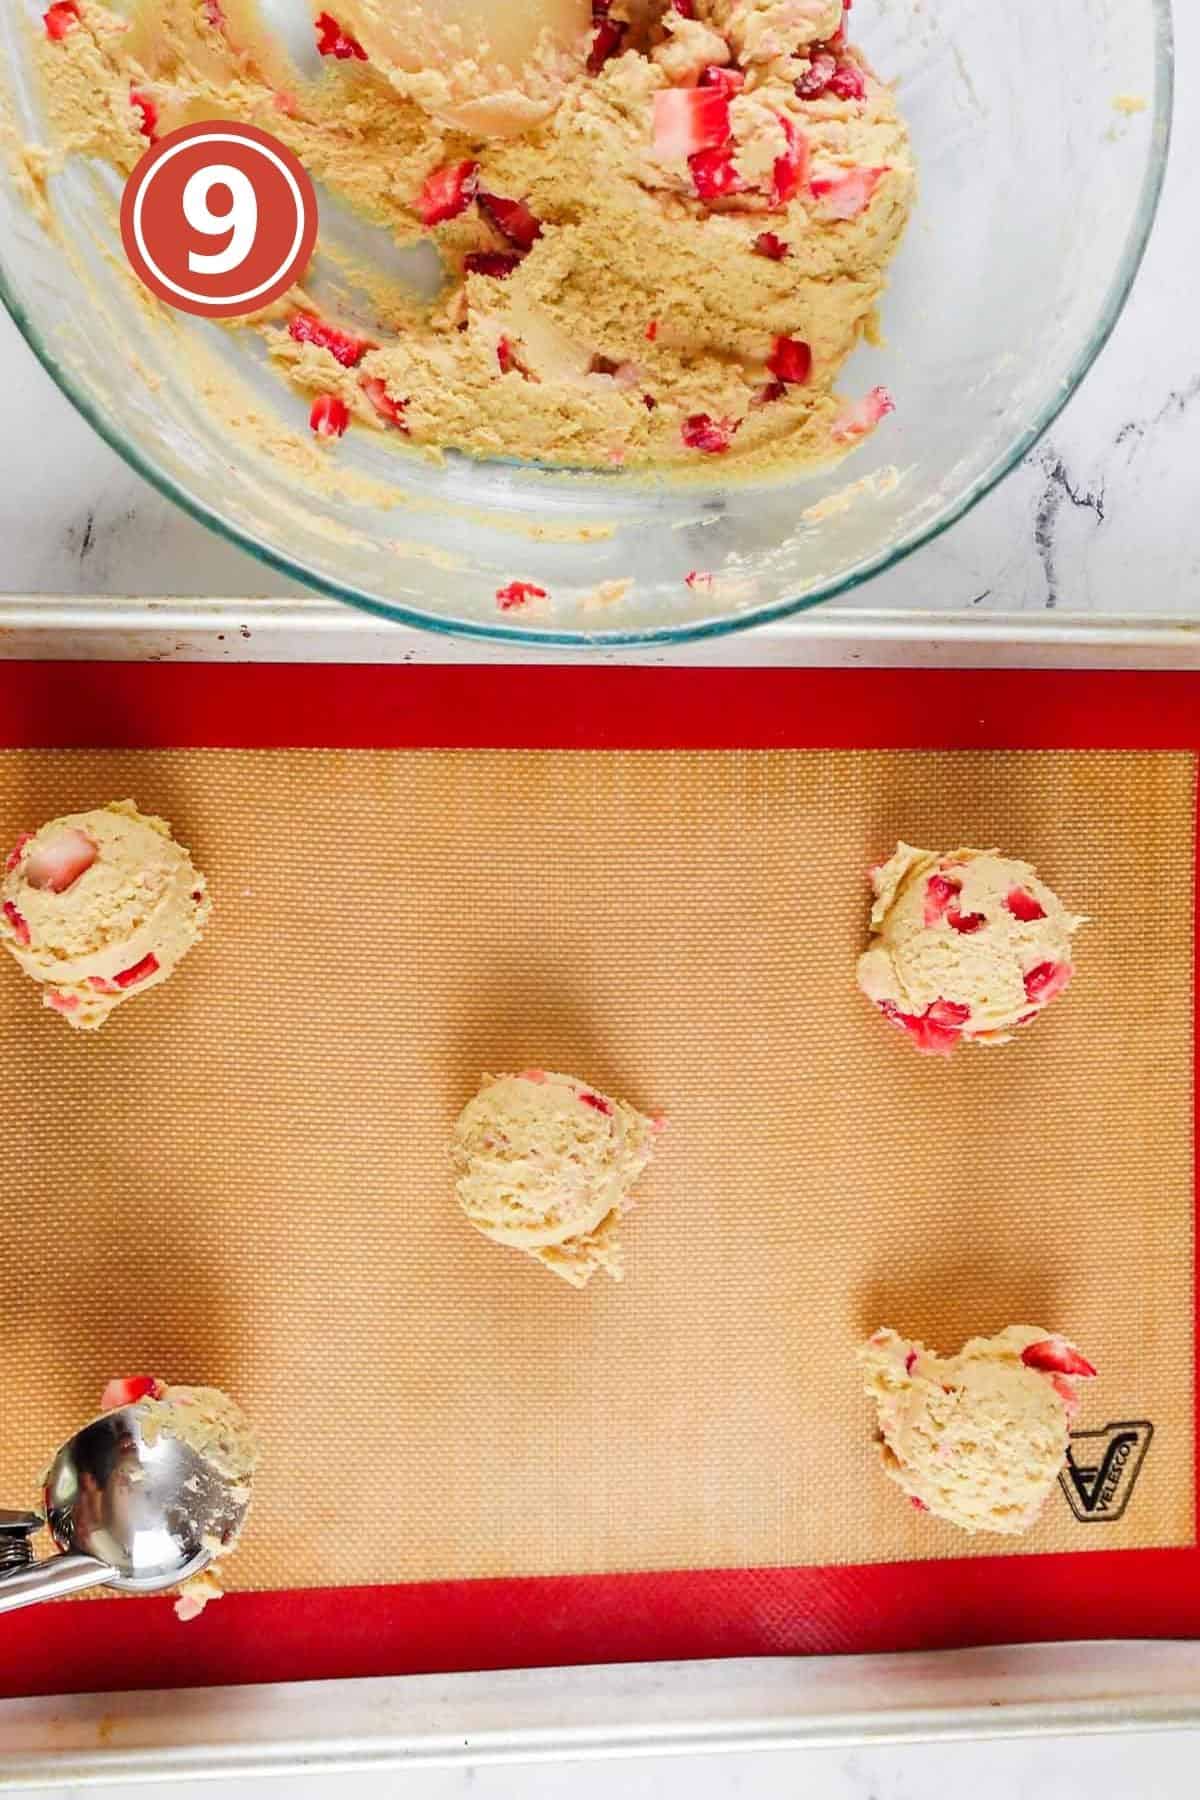 using an ice cream scoop, scoop out the cookies on the baking tray.